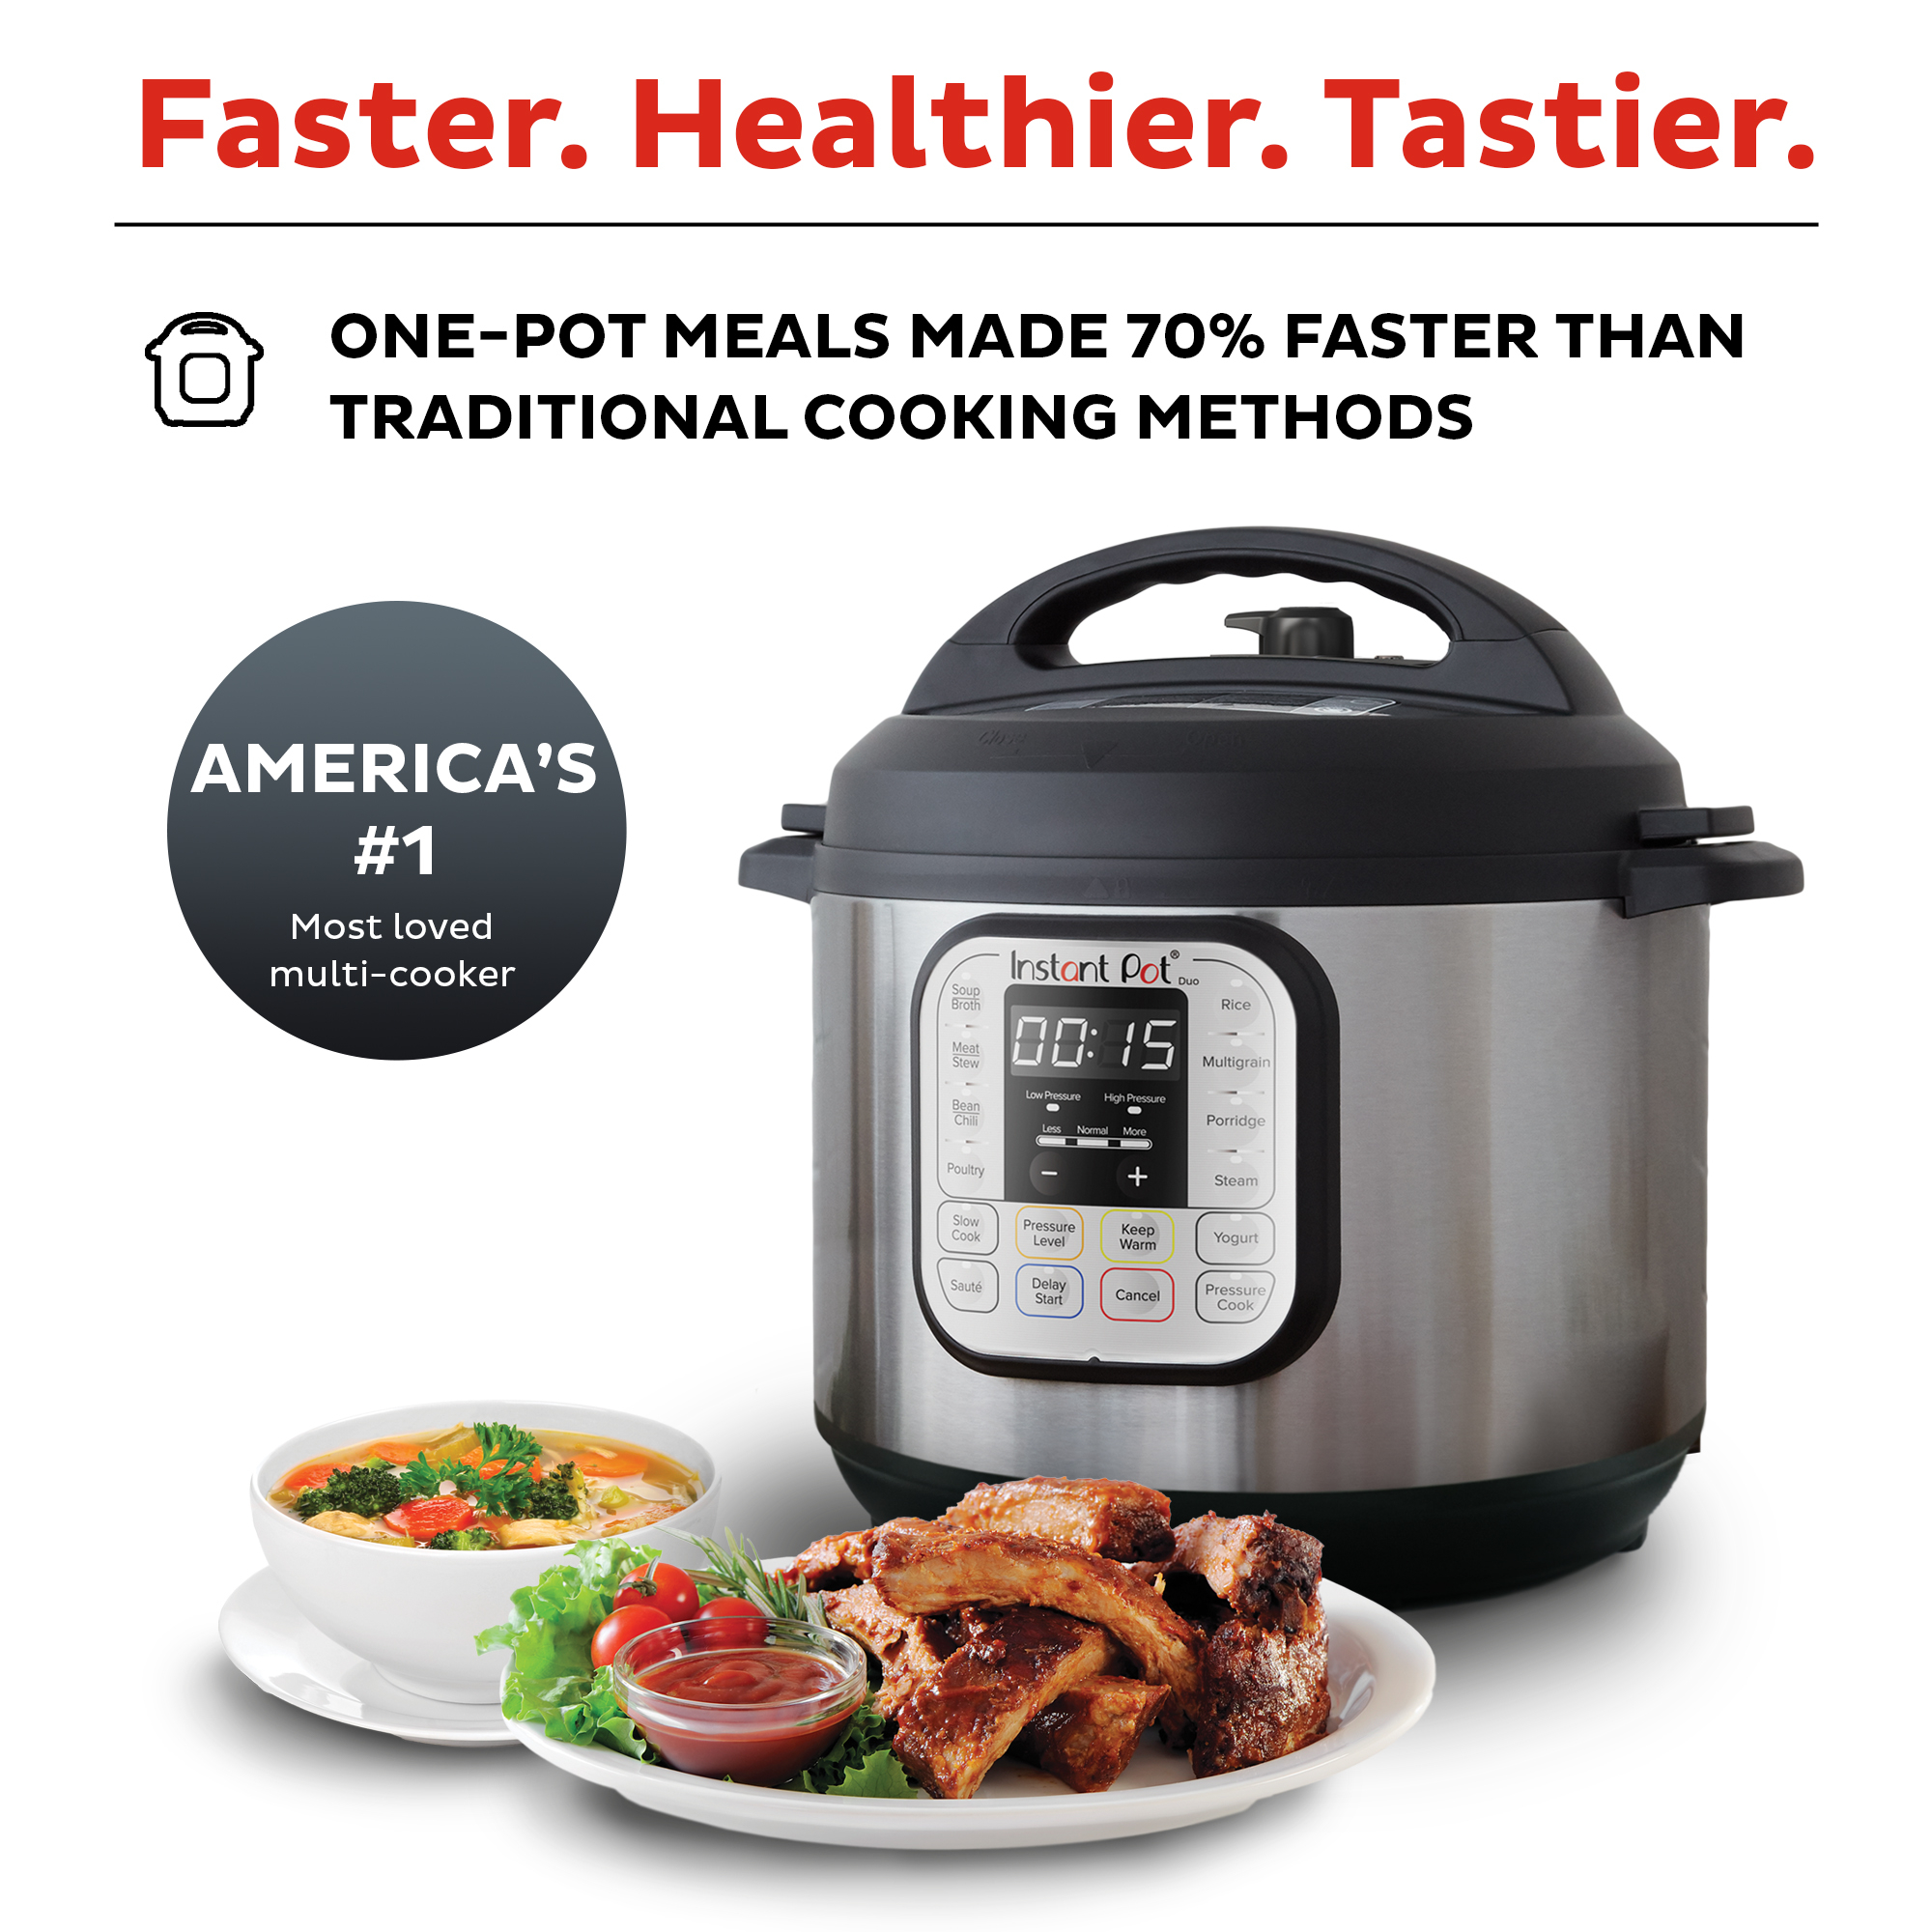 Instant Pot DUO60 V4 6-Quart Duo Electric Pressure Cooker/Slow Cooker - image 3 of 9